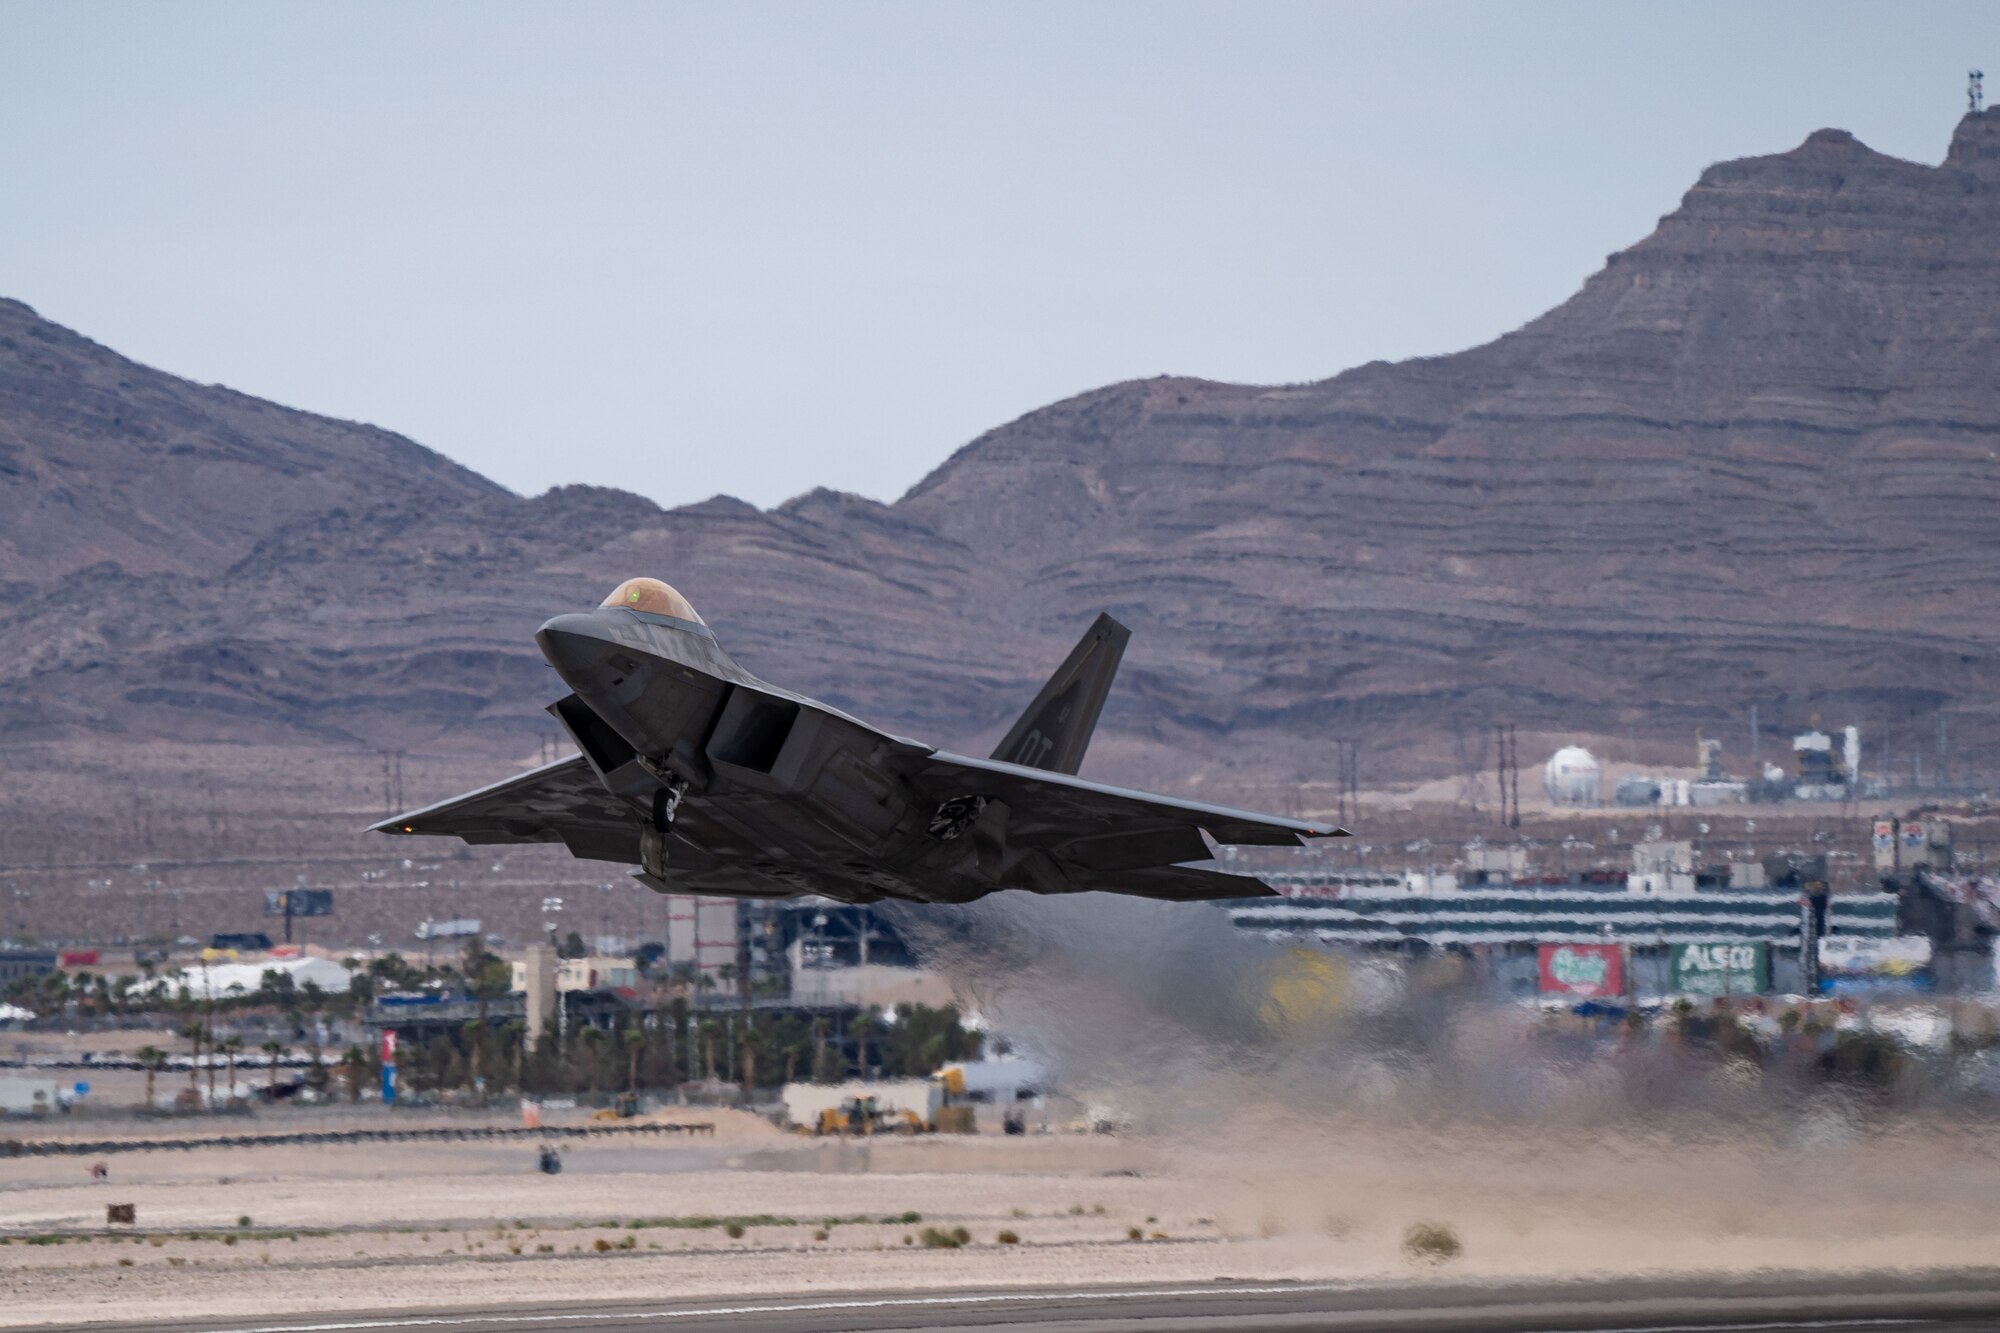 An F-22 Raptor assigned to the 422nd Test and Evaluation Squadron takes off during Black Flag 22-1 at Nellis Air Force Base, Nevada, May 10, 2022. Black Flag 22-1 is focused on developing and validating large force tactics and integration required to deliver combat capability and tactical advantage for the Combat Air Force. (U.S. Air Force photo by Airman 1st Class Josey Blades)